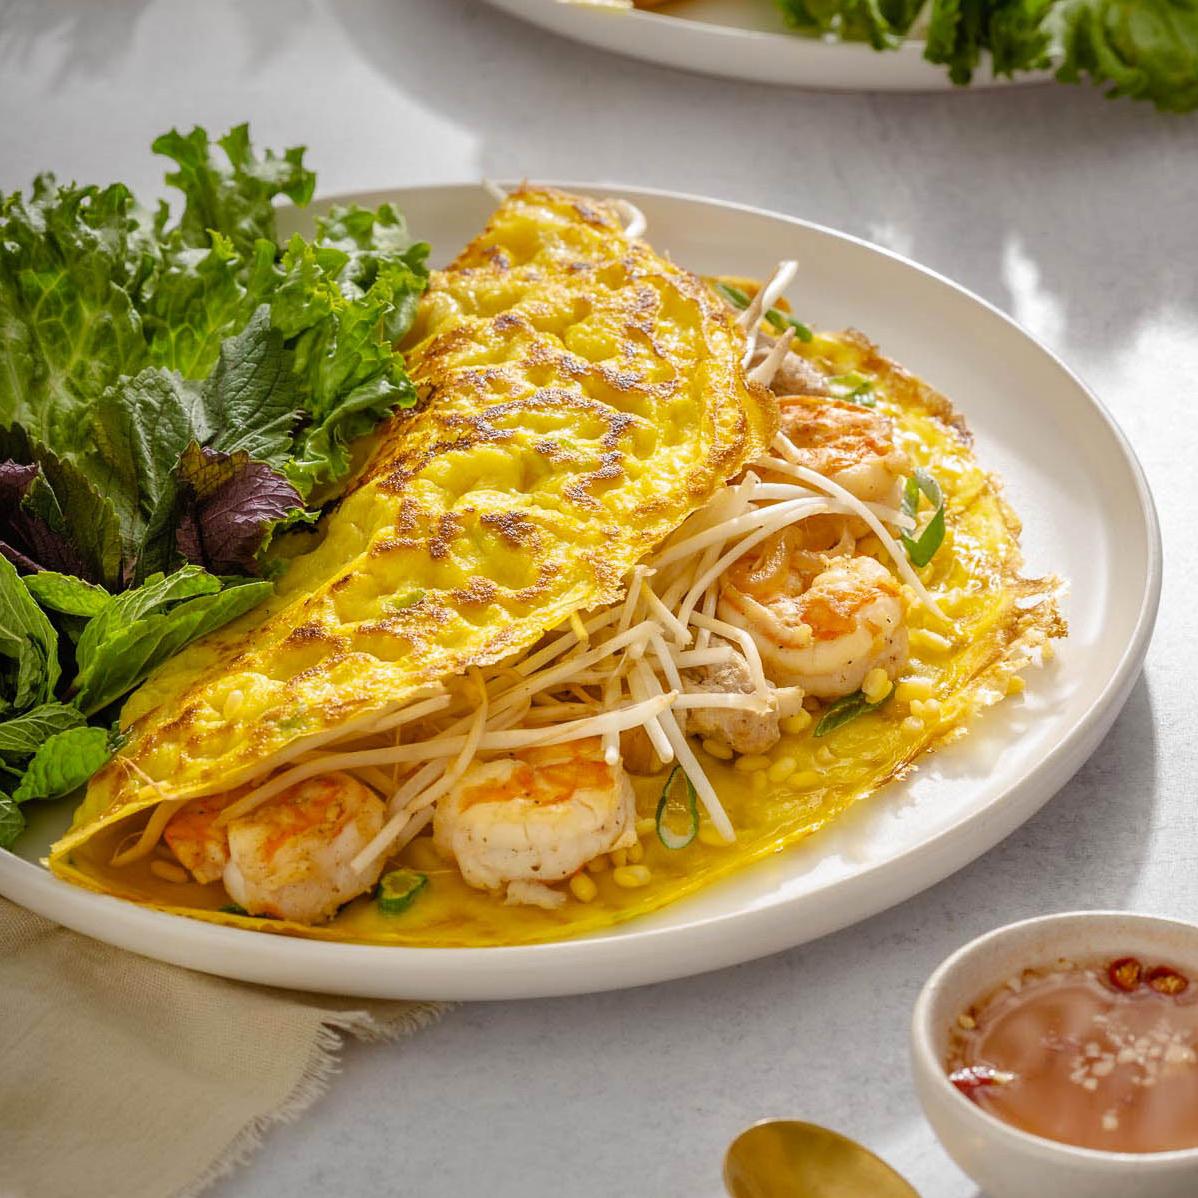  This omelette is chock-full of delicious veggies and protein.